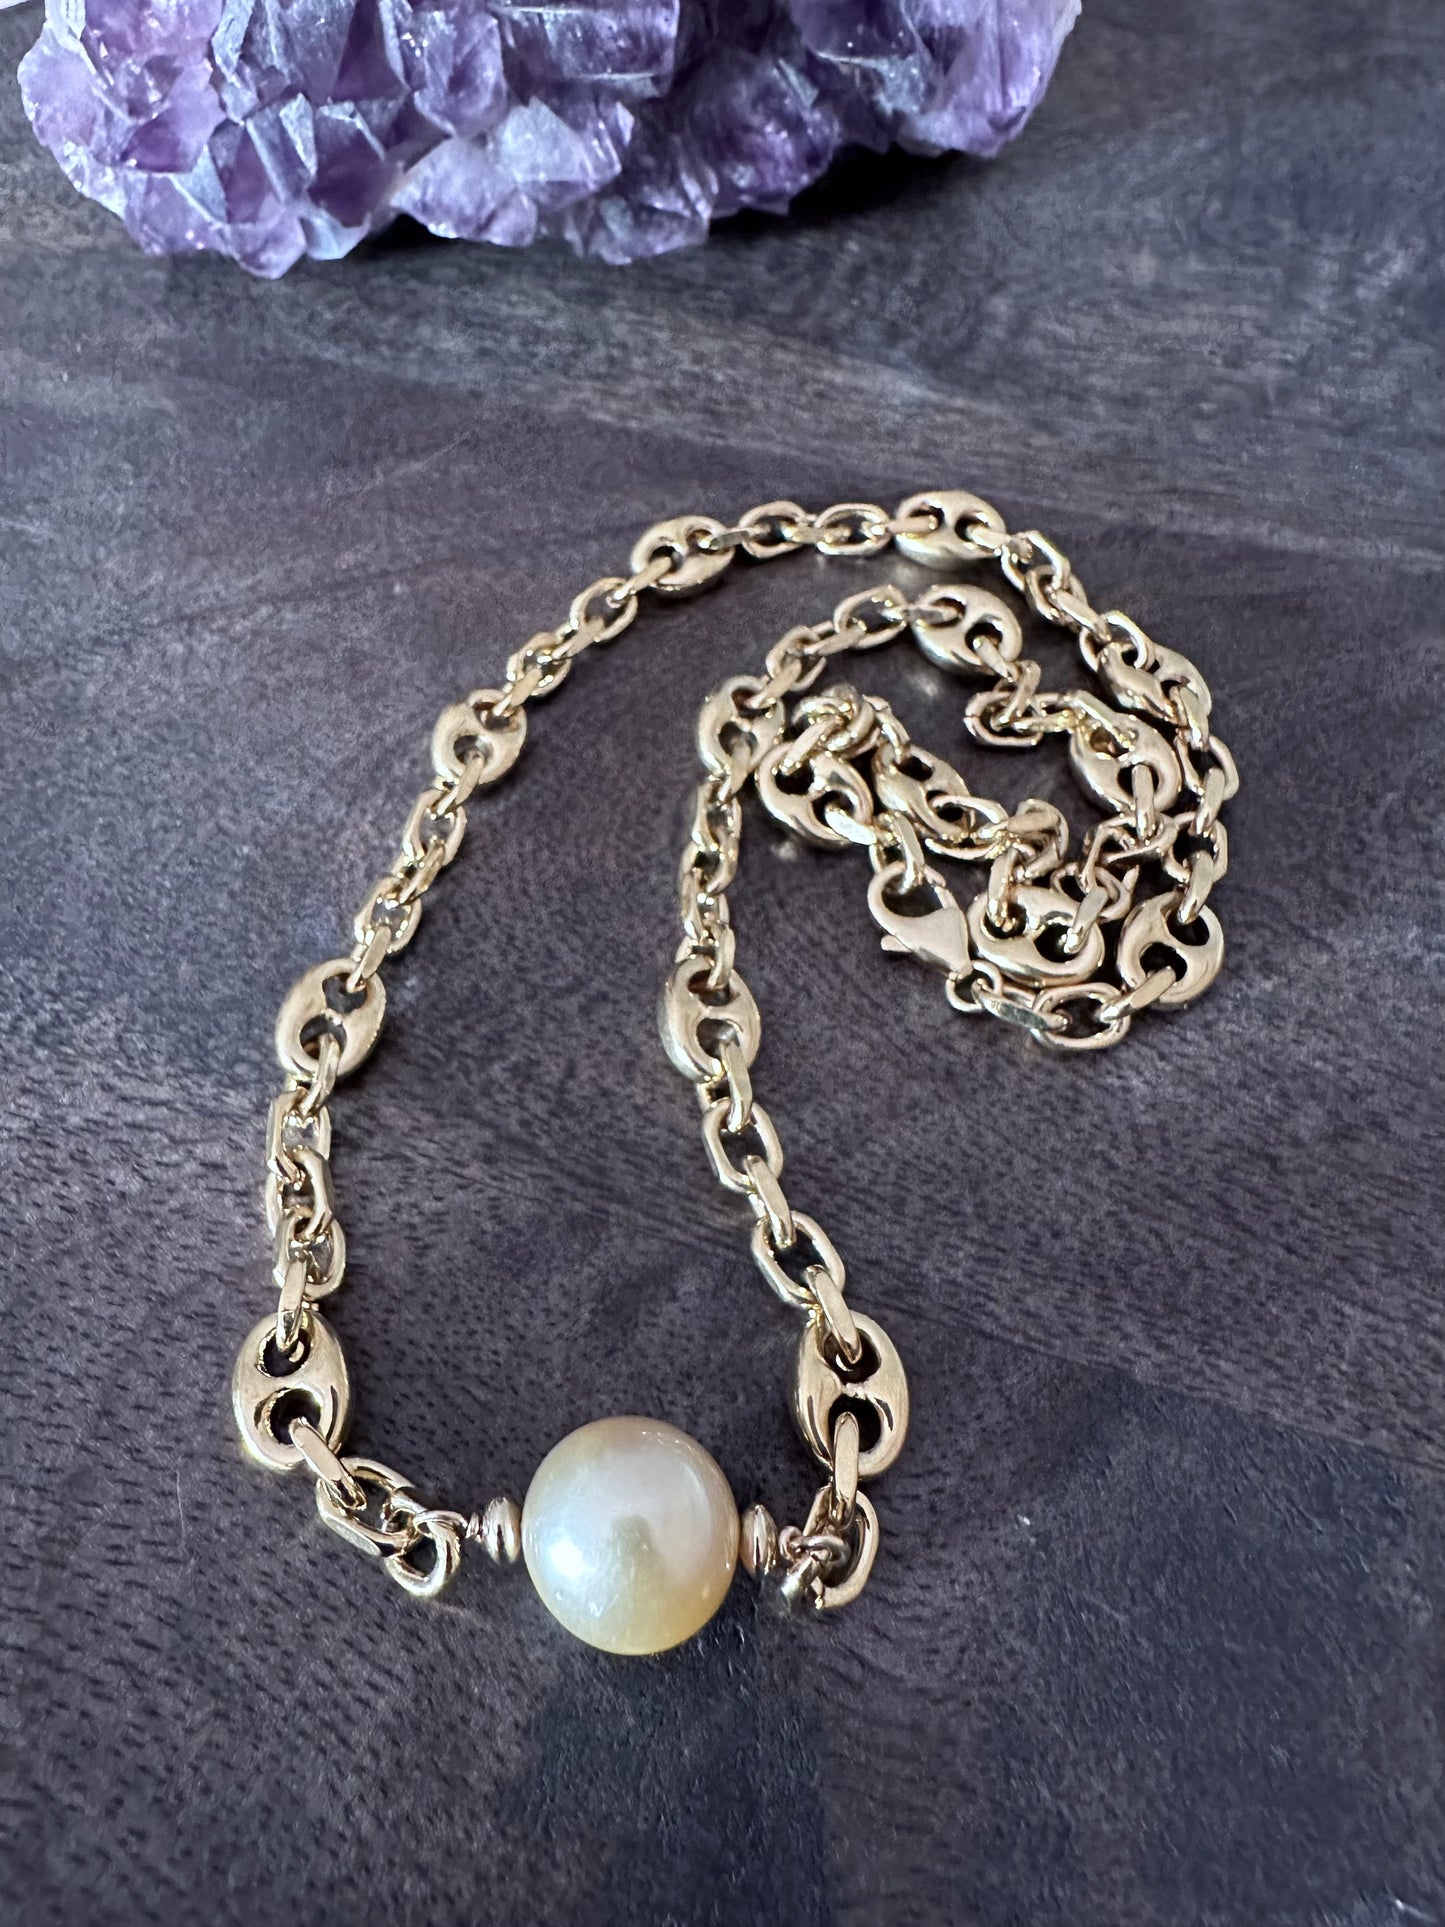 Golden South Seas Gold Filled Cartier Style Necklace